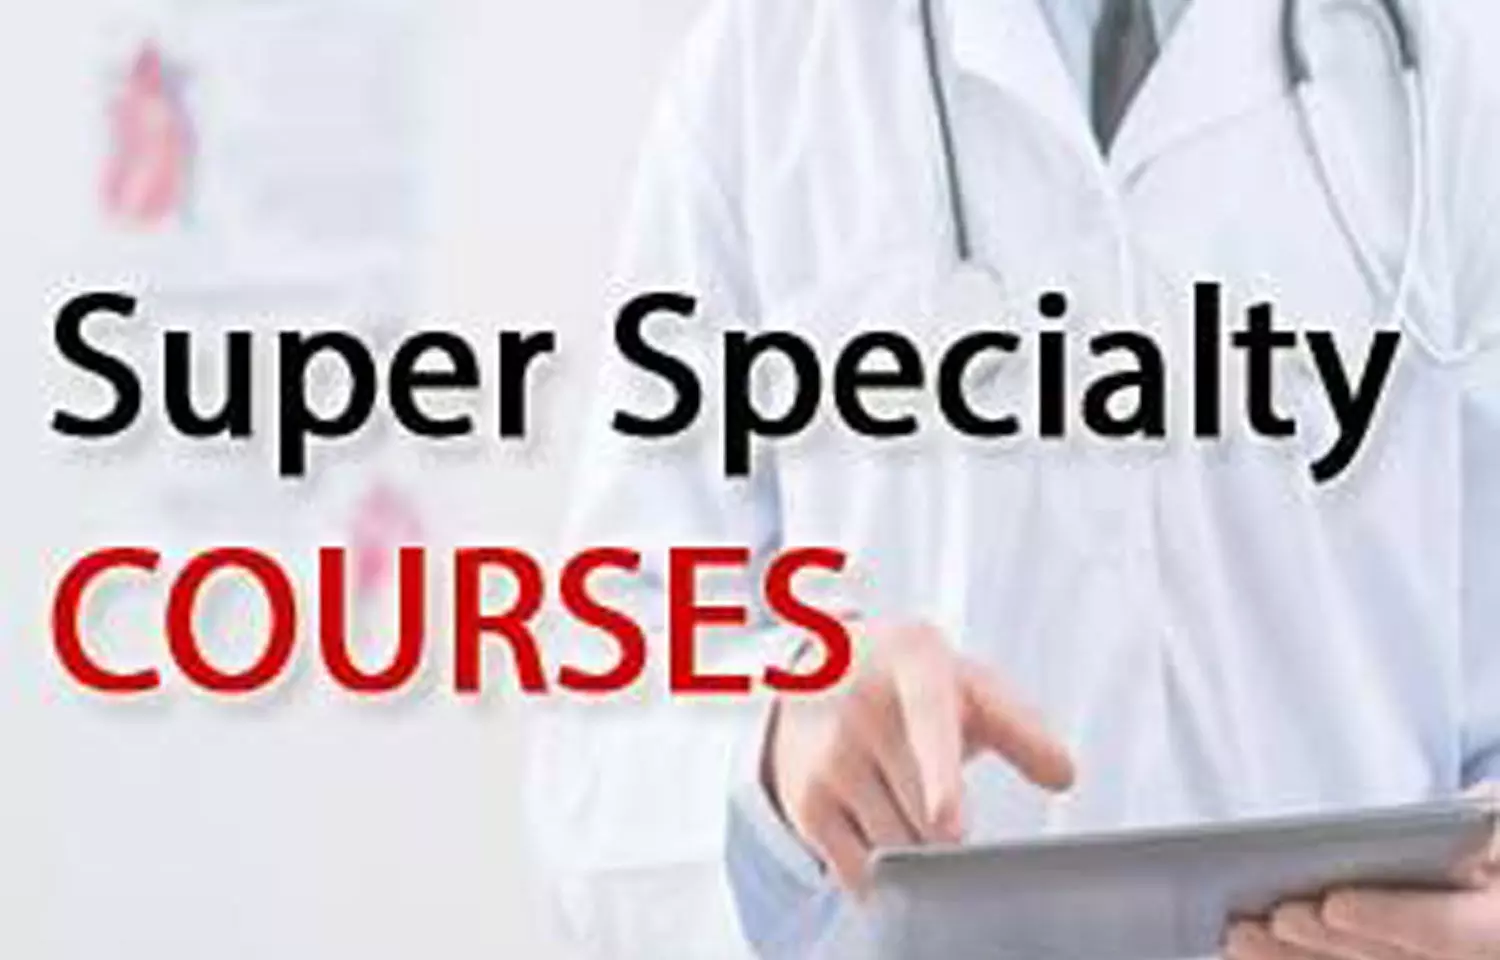 Super Specialty Courses 2021 to Commence from April 18, continue till March 31, 2025: NMC